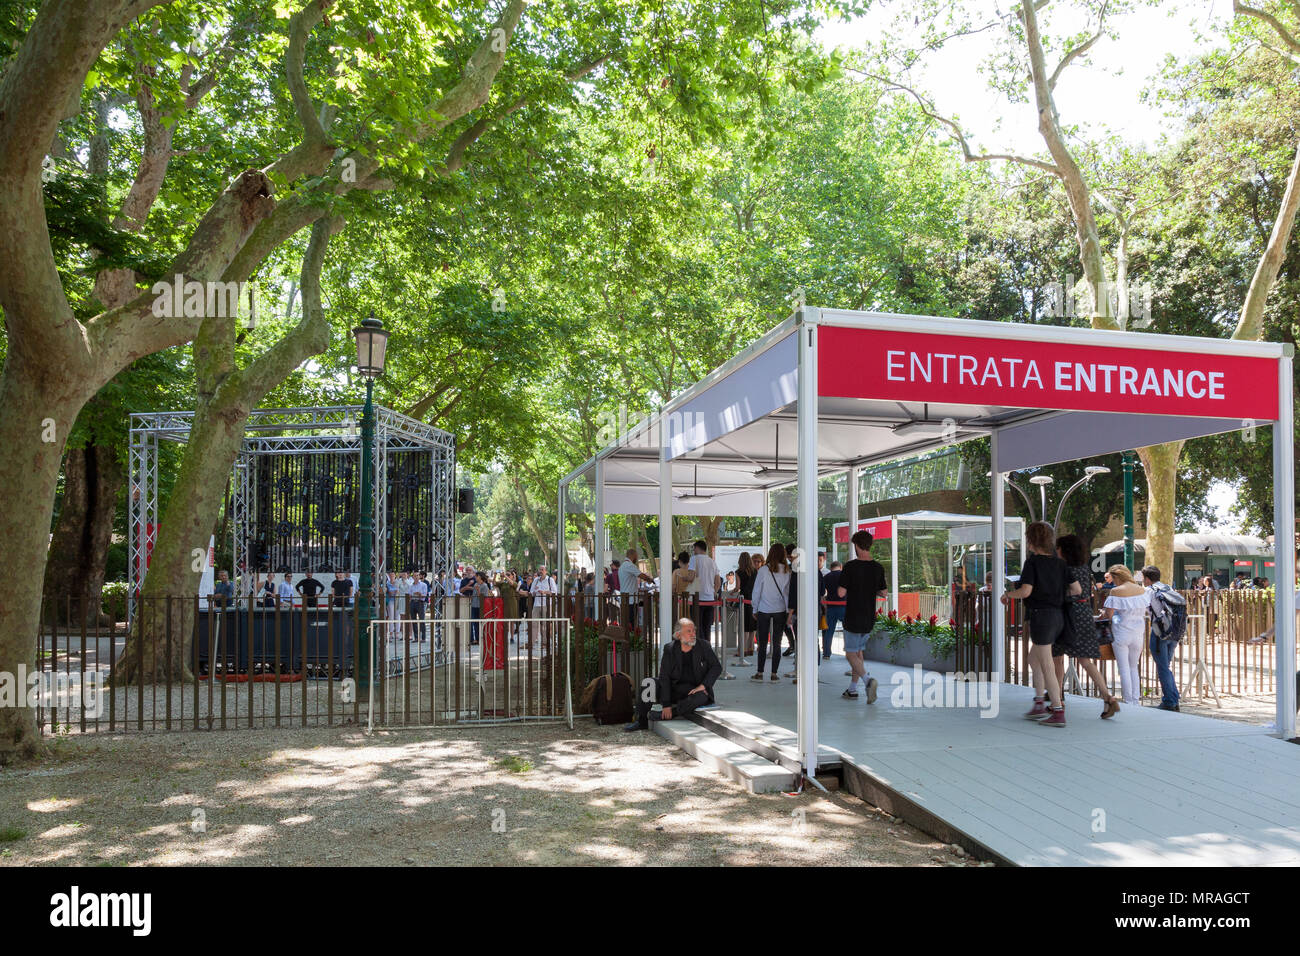 Venice, Veneto, Italy. 26th May 2018. The opening day of the 2018 Architecture  Biennale entitled Freespace in Giardini Pubblici (Public Gardens) Castello. People entering the main entrance to the Gardens and pavillions. Credit MLCpics/Alamy Live News Stock Photo